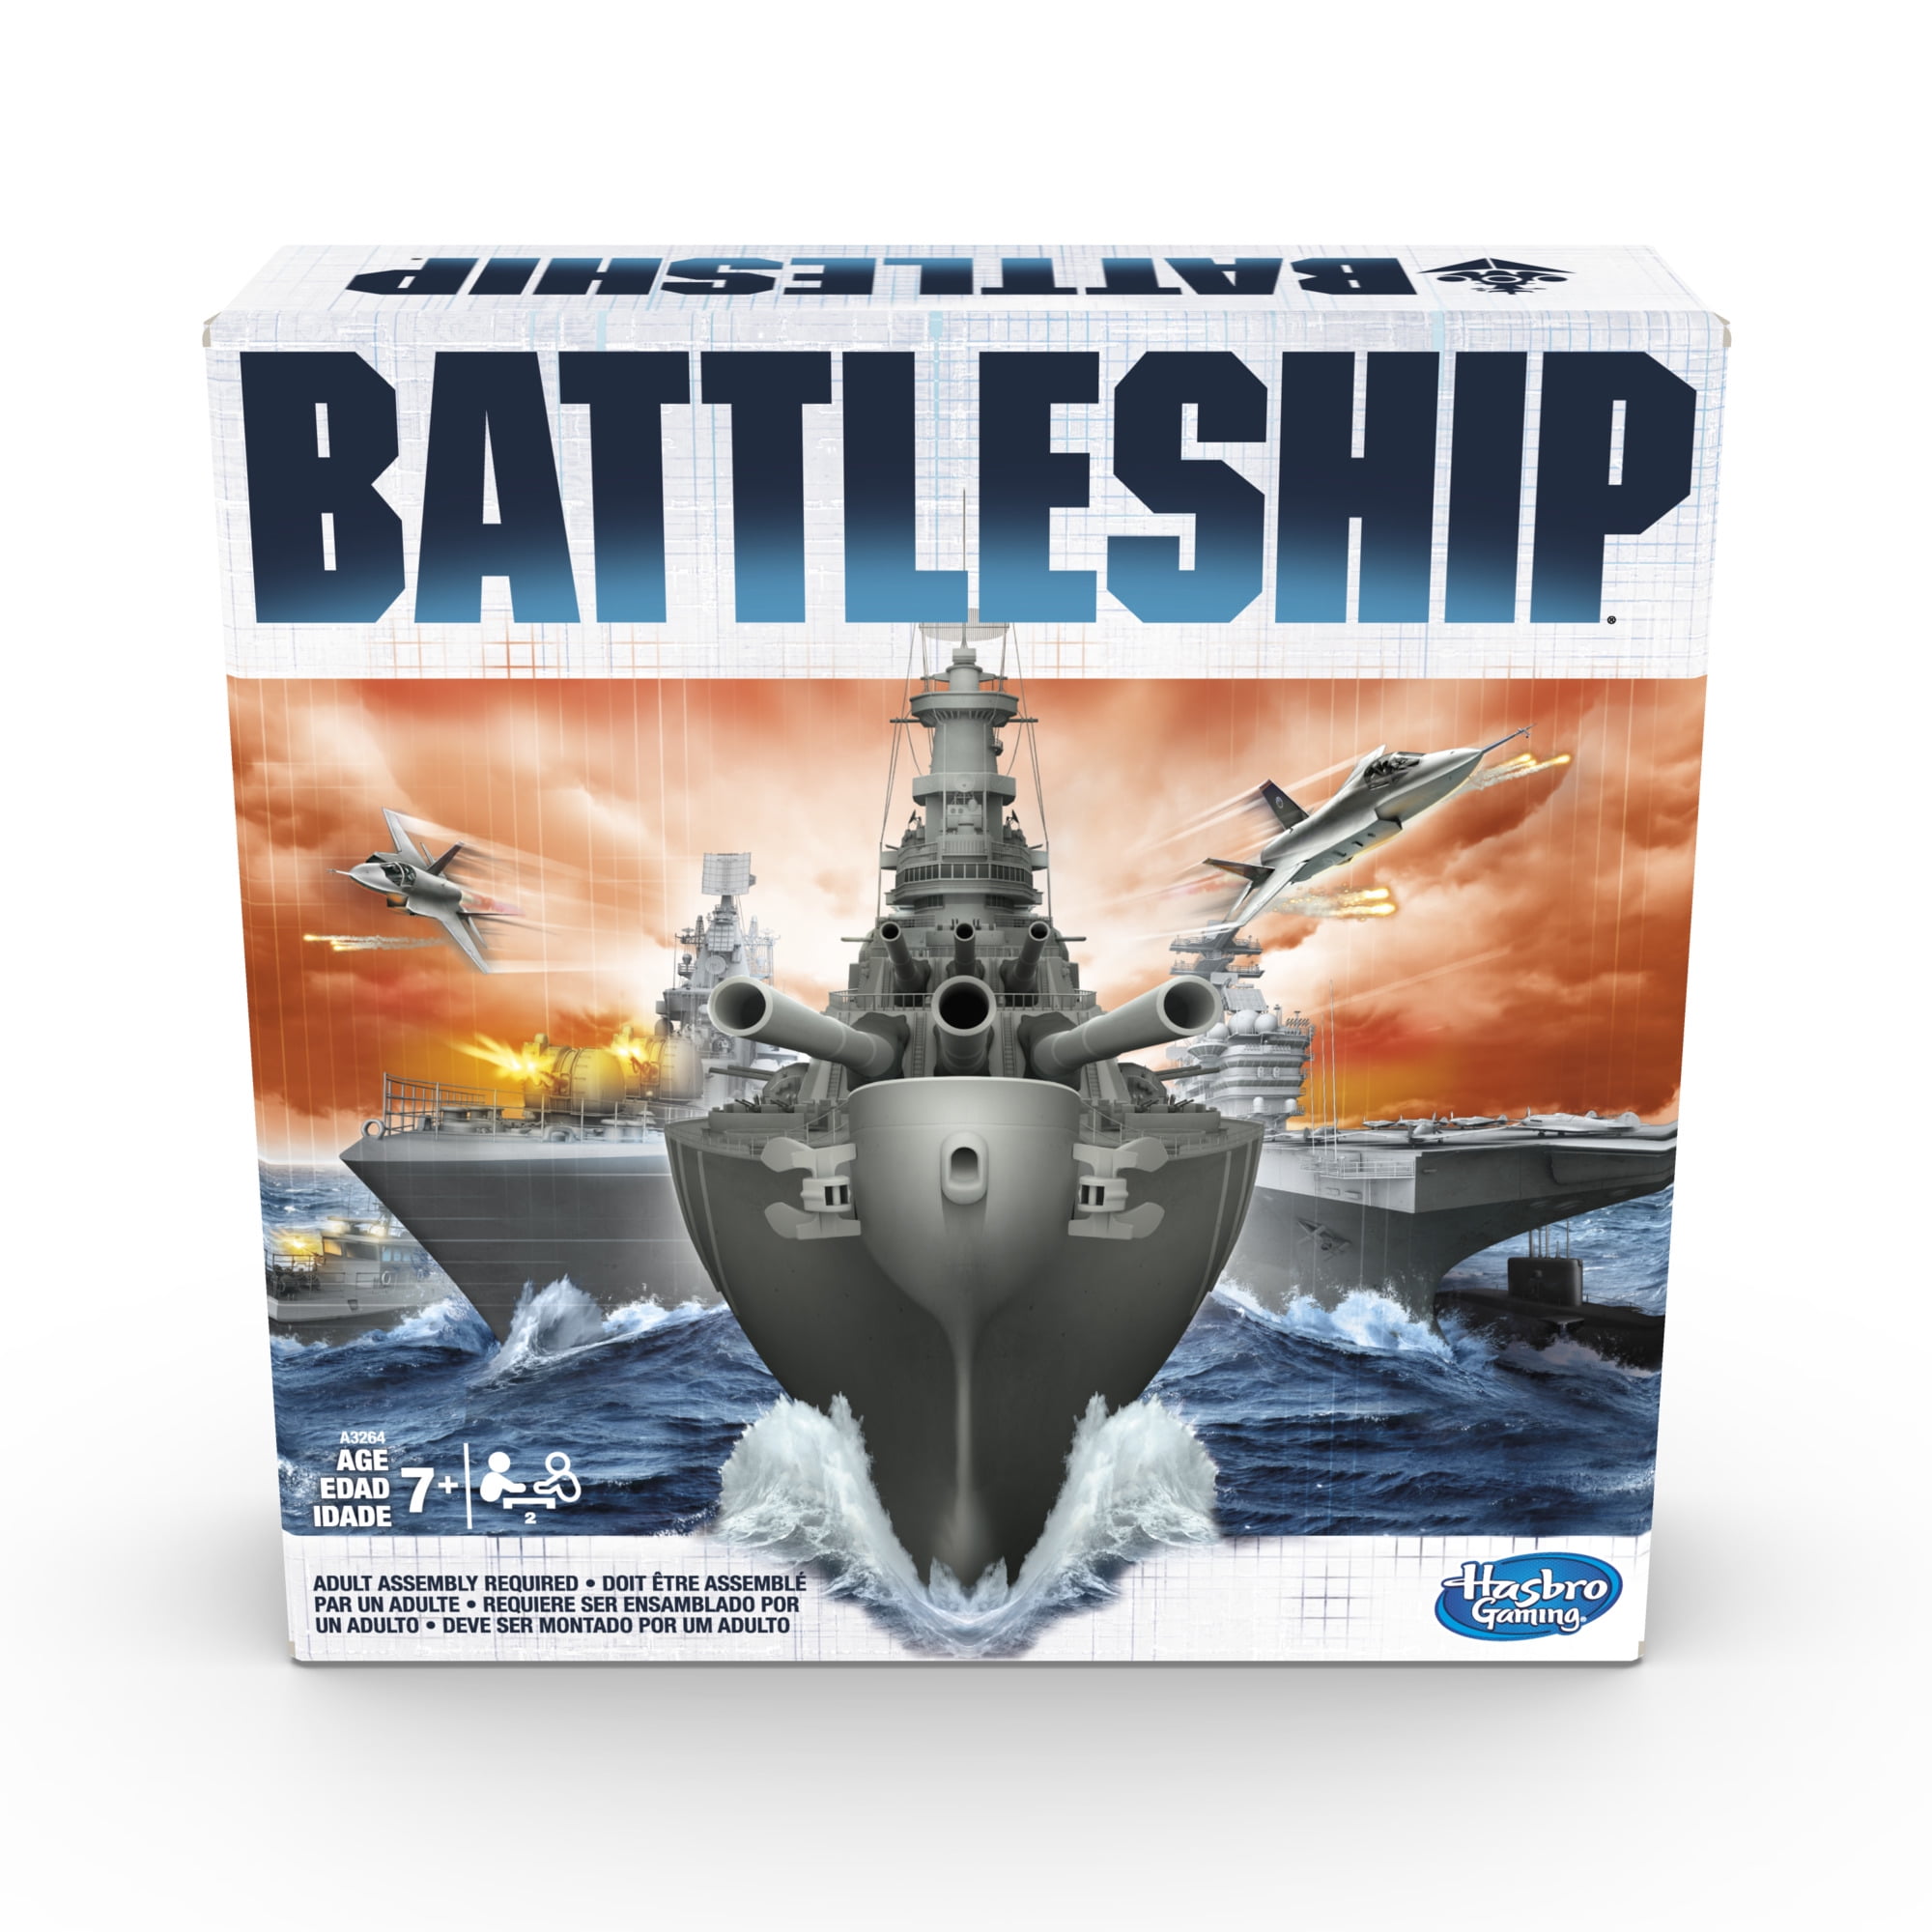 A3264 for sale online Hasbro Portable Classic Battleship Game 